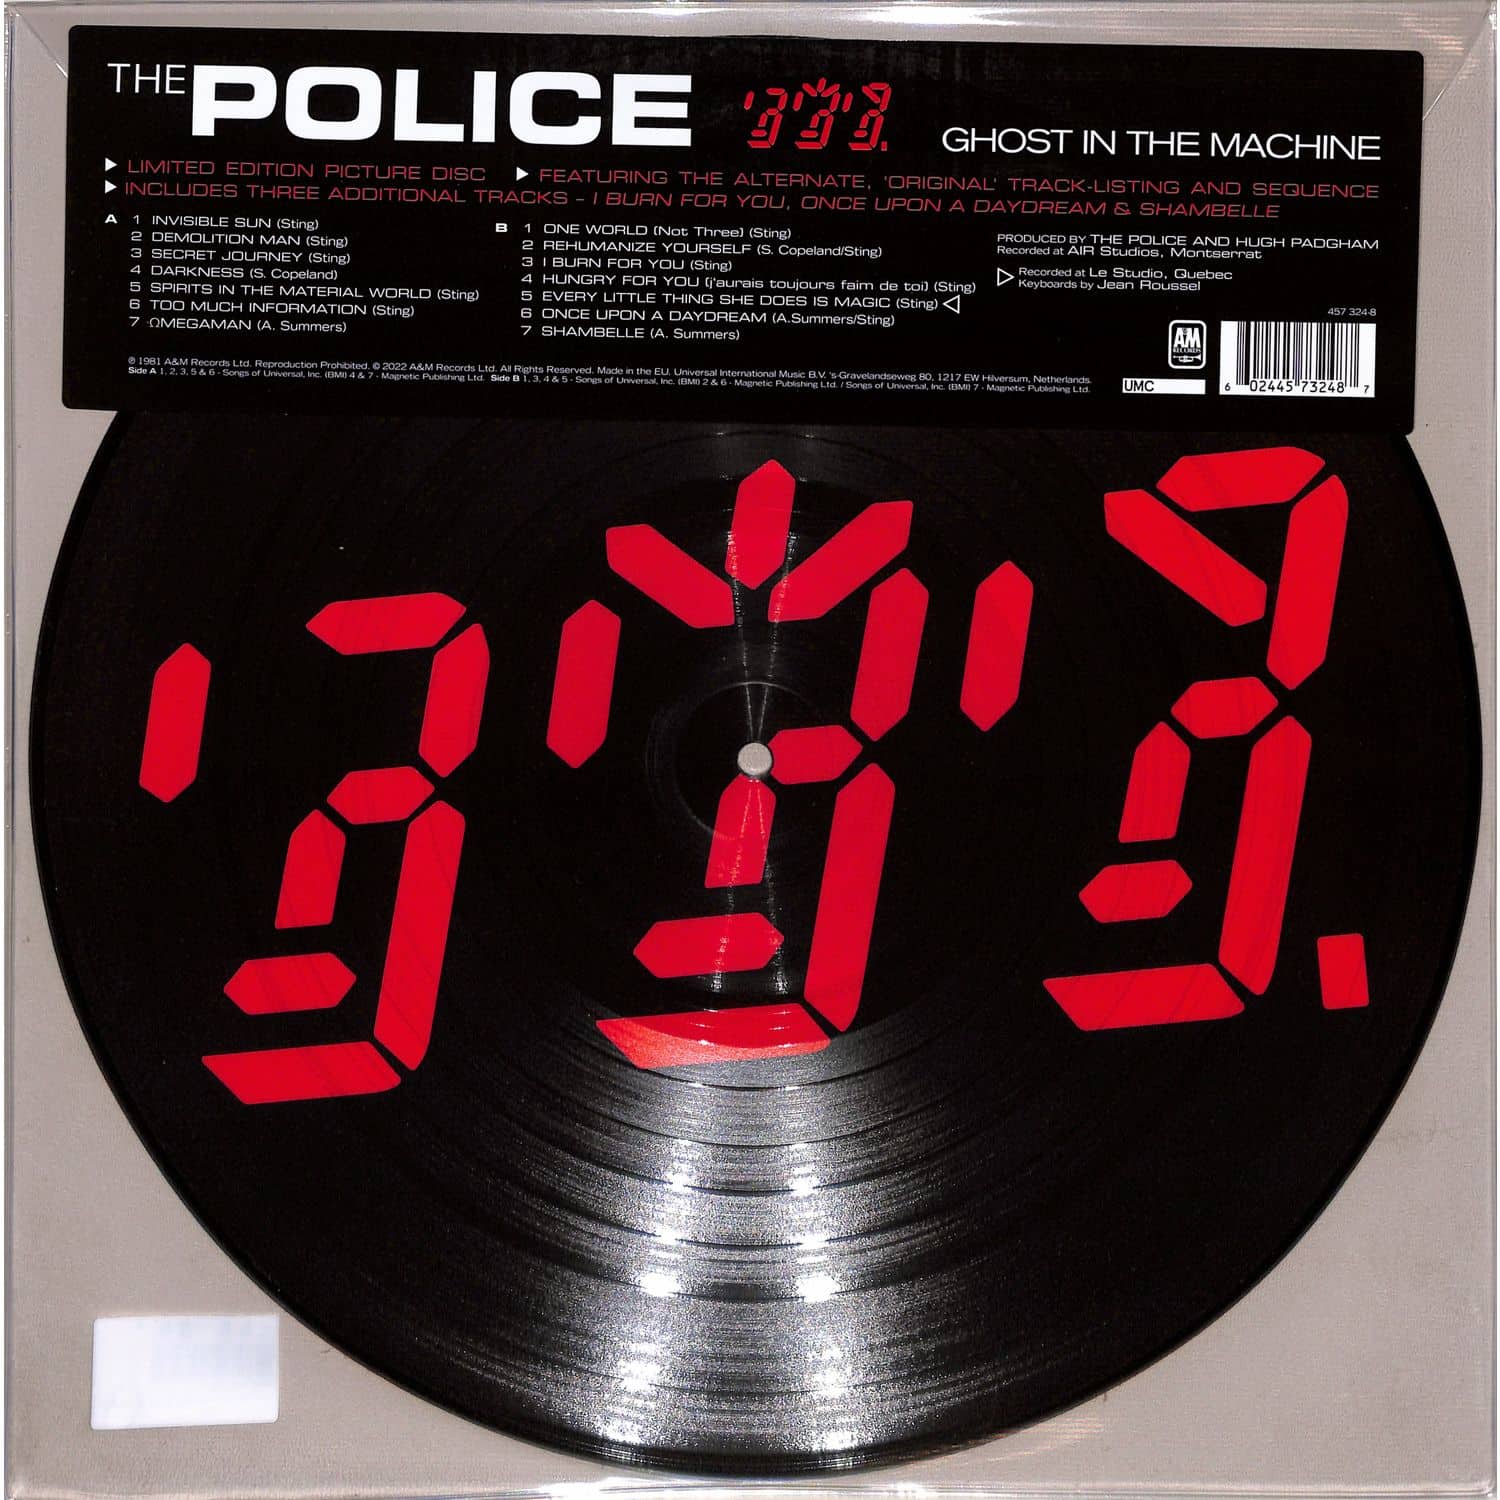 The Police - GHOST IN THE MACHINE 